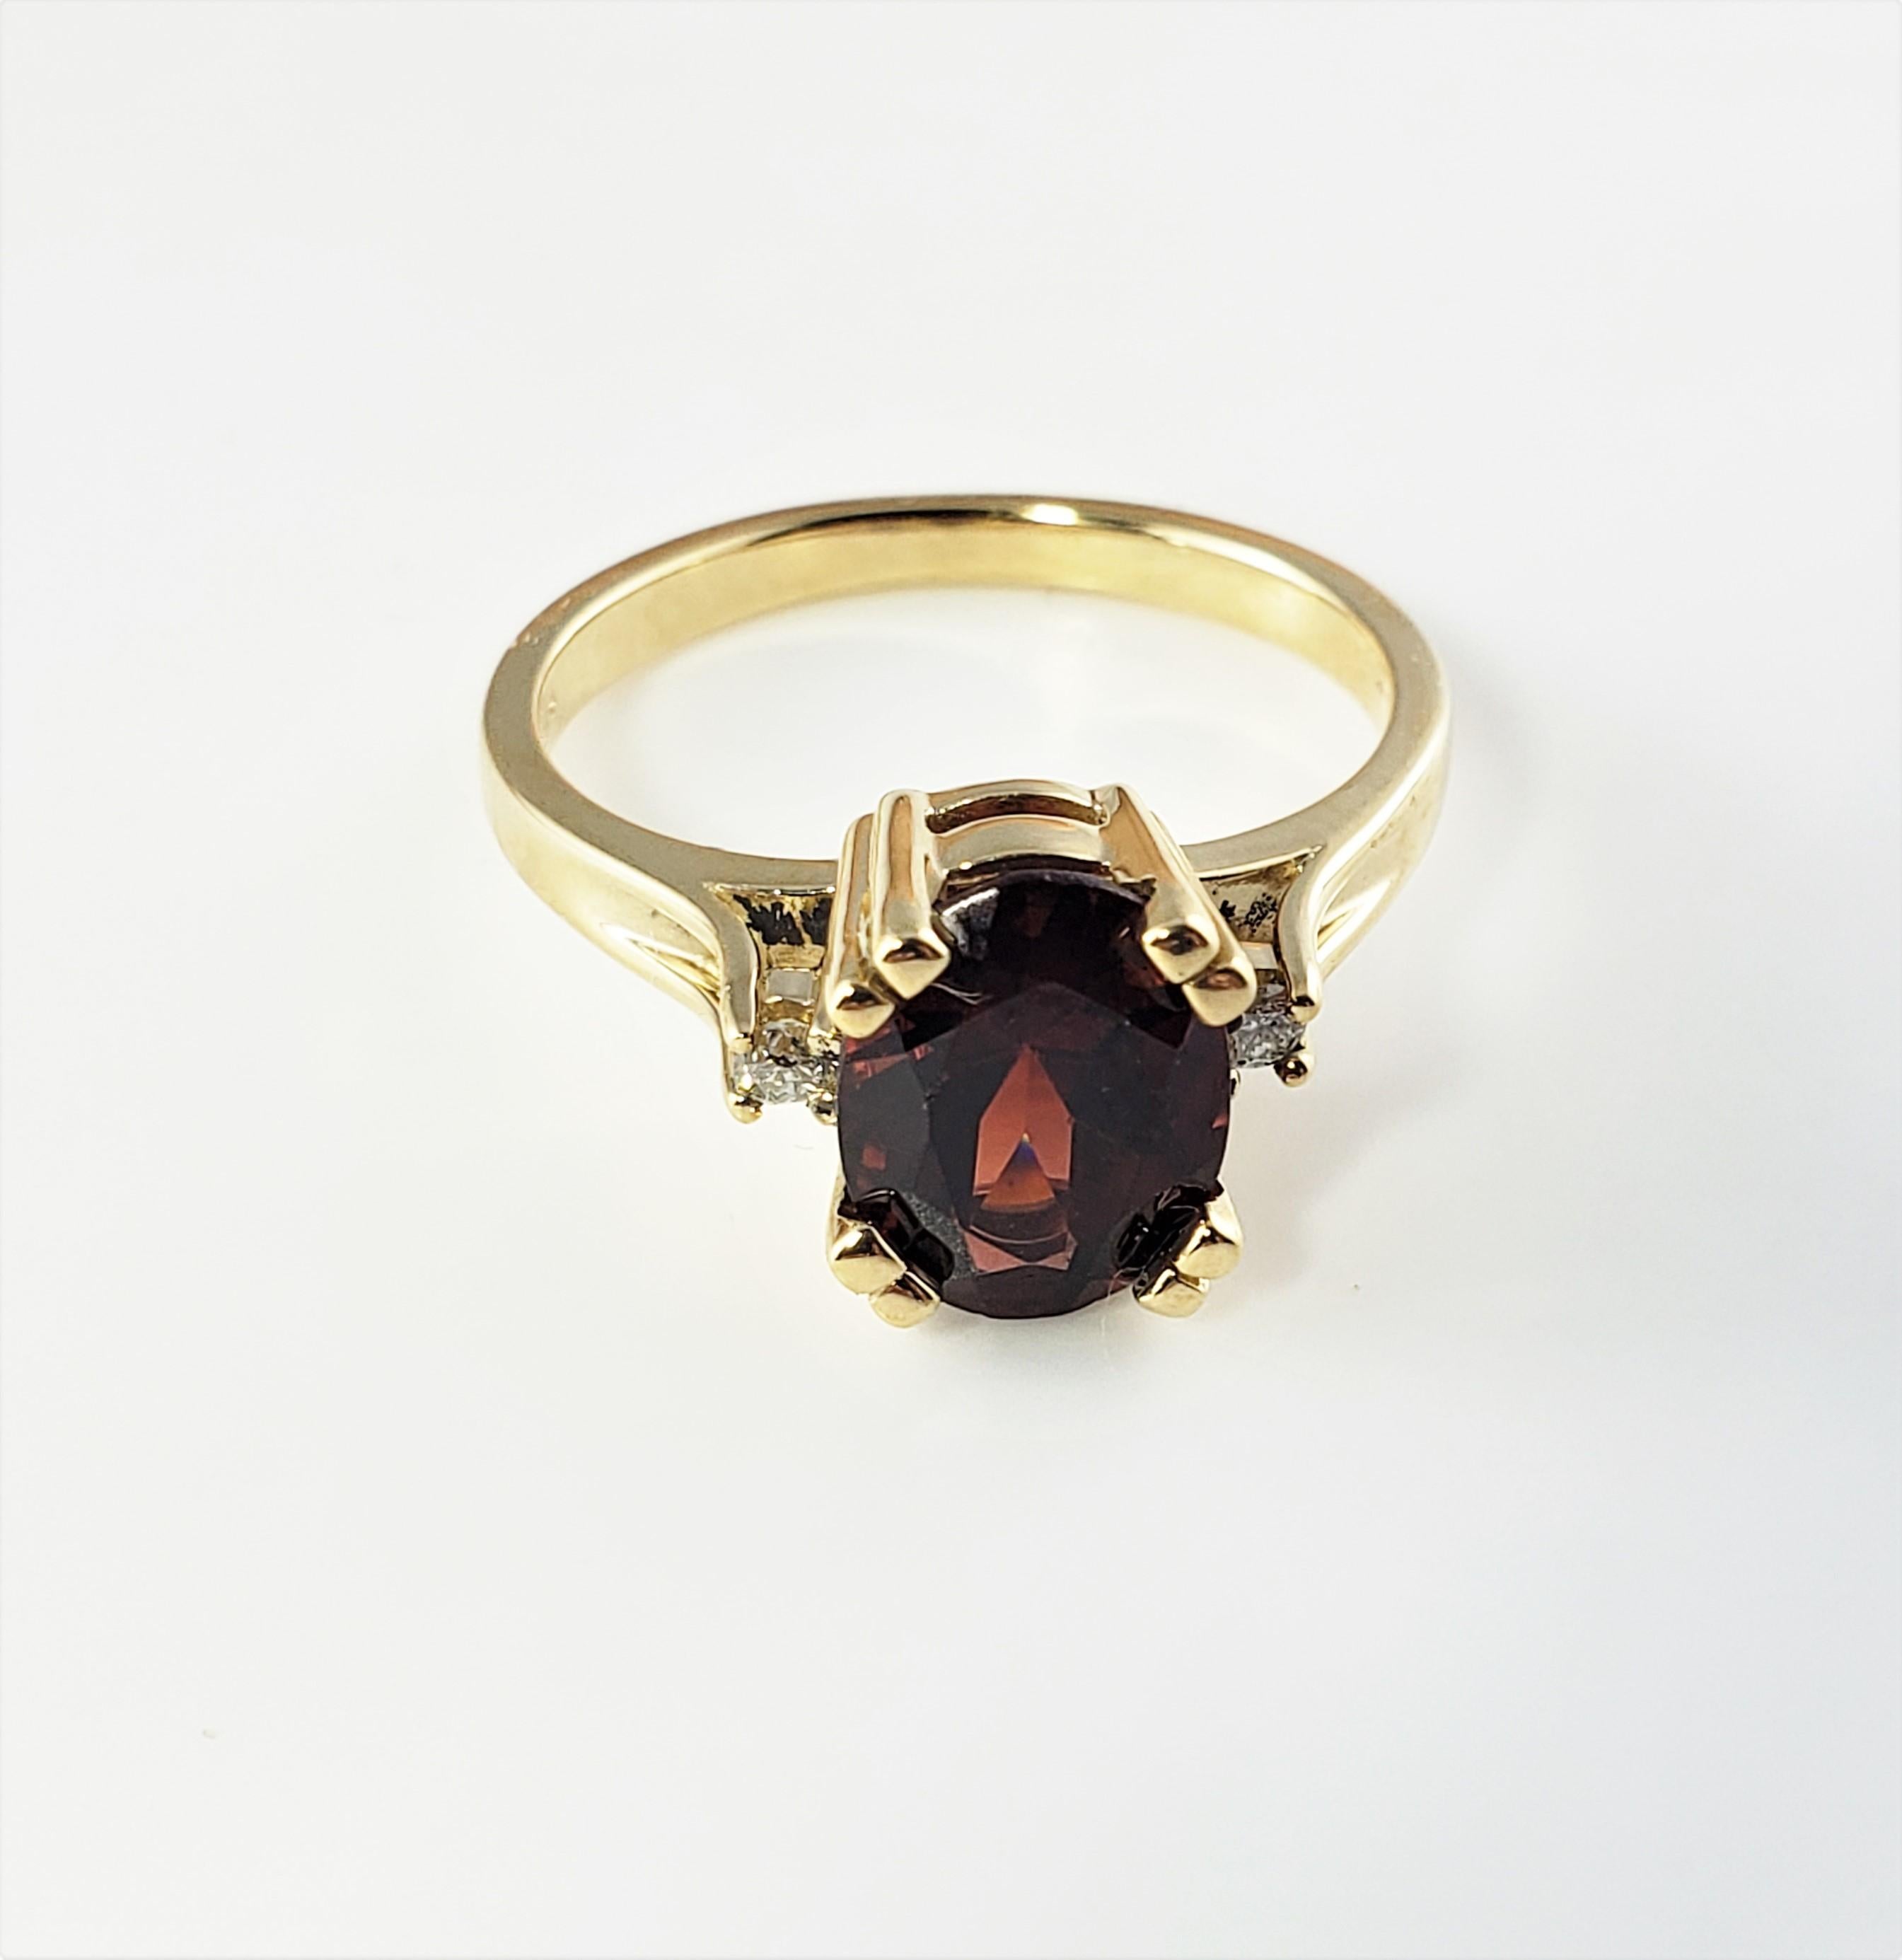 14 Karat Yellow Gold Simulated Garnet and Diamond Ring Size 6.5-

This lovely ring features one oval simulated garnet (9 mm x 7 mm) and two round brilliant cut diamonds set in classic 14K yellow gold.  Shank: 2 mm.

Approximate total diamond weight: